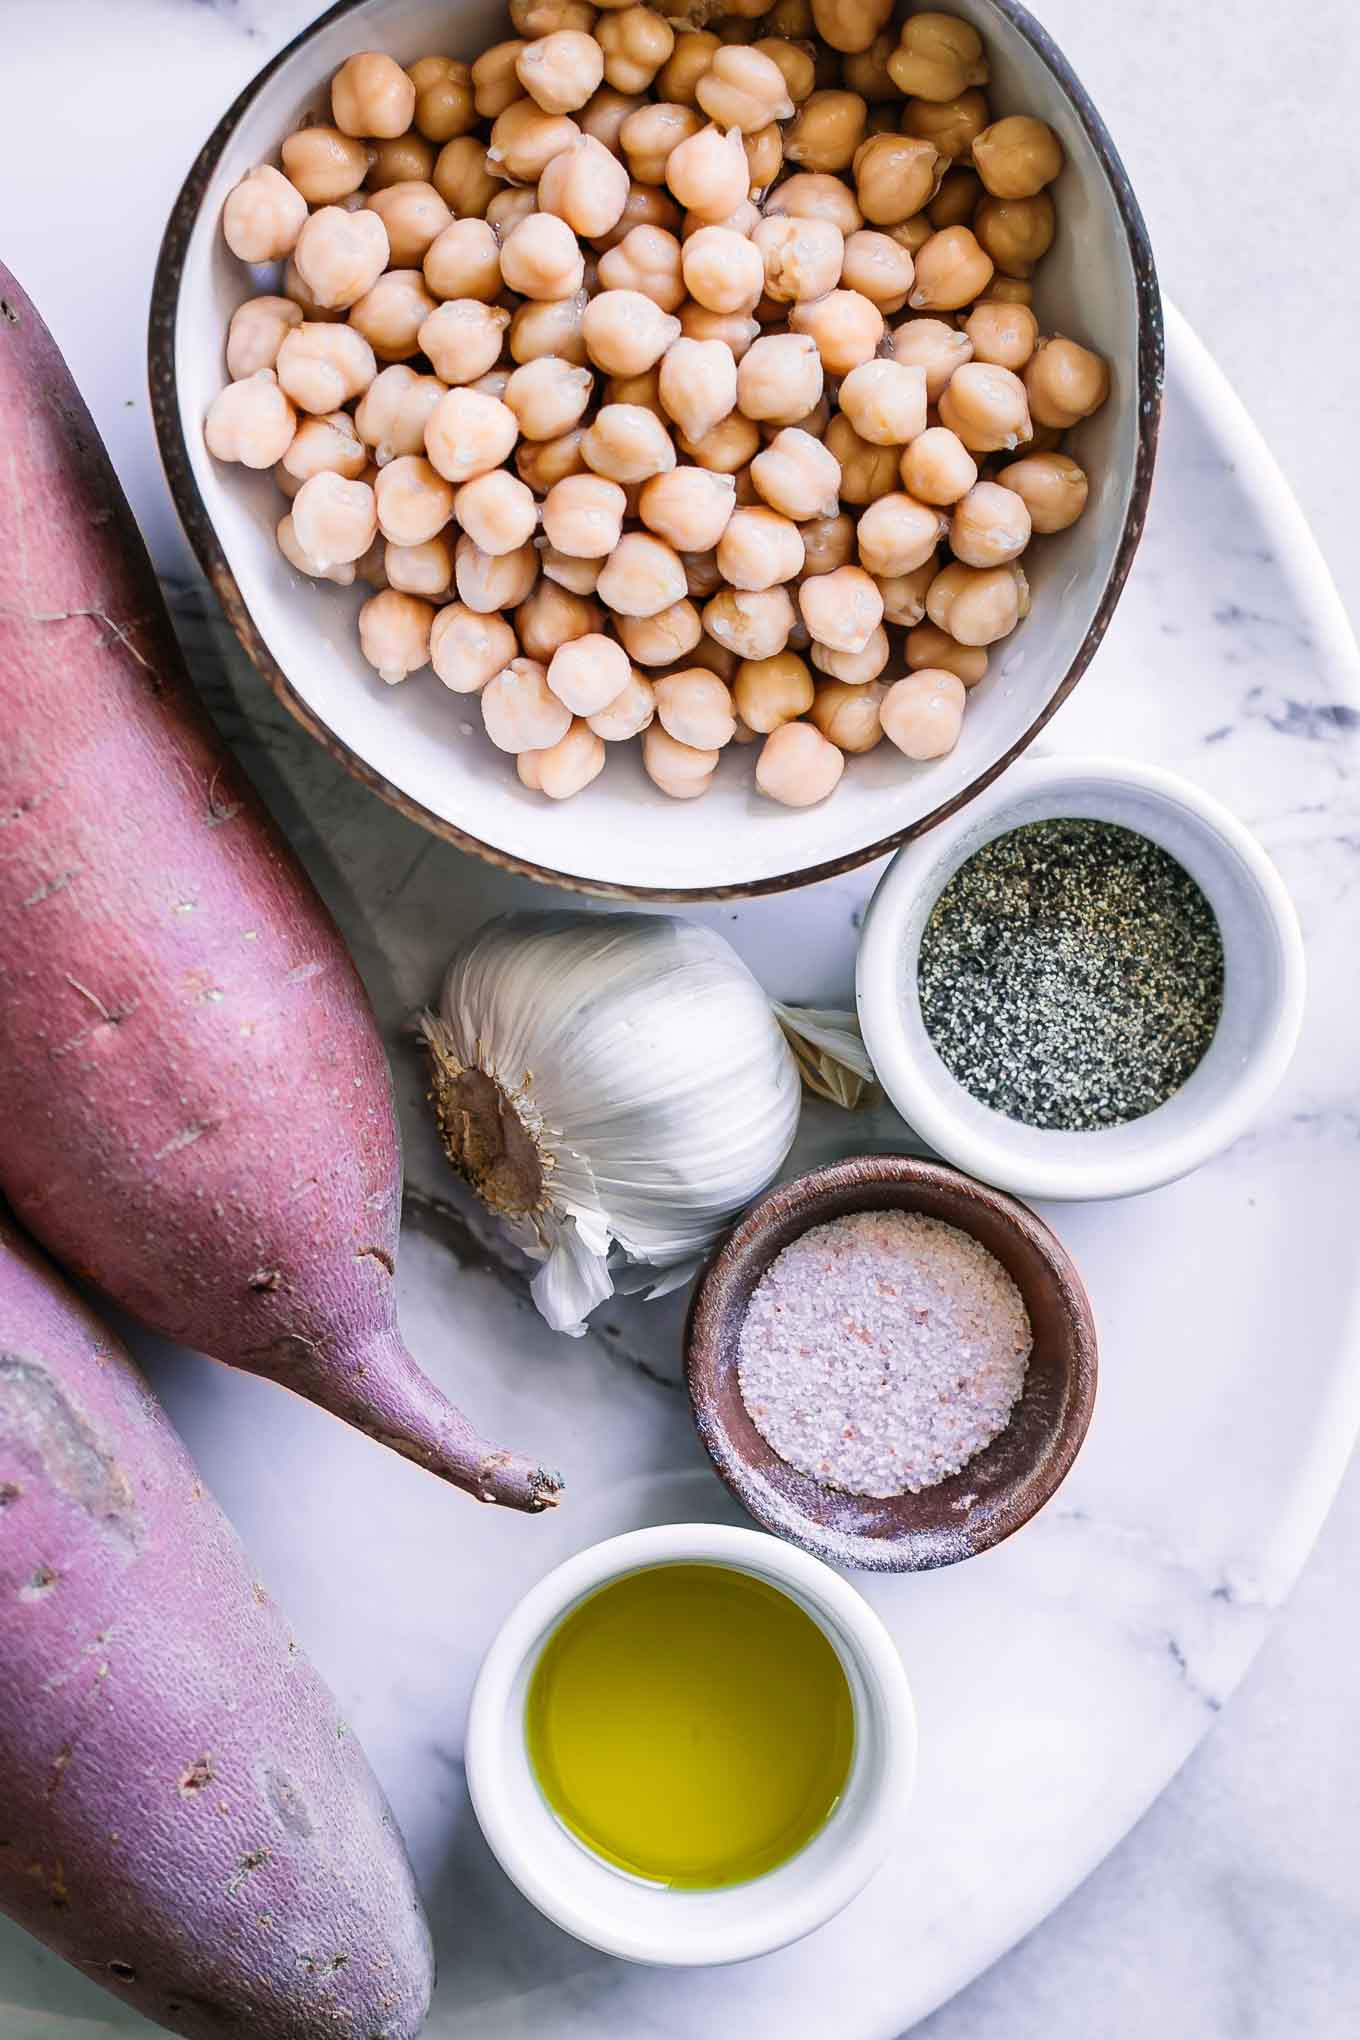 sweet potatoes and a bowl of chickpeas, garlic, oil, salt, and pepper on a white table